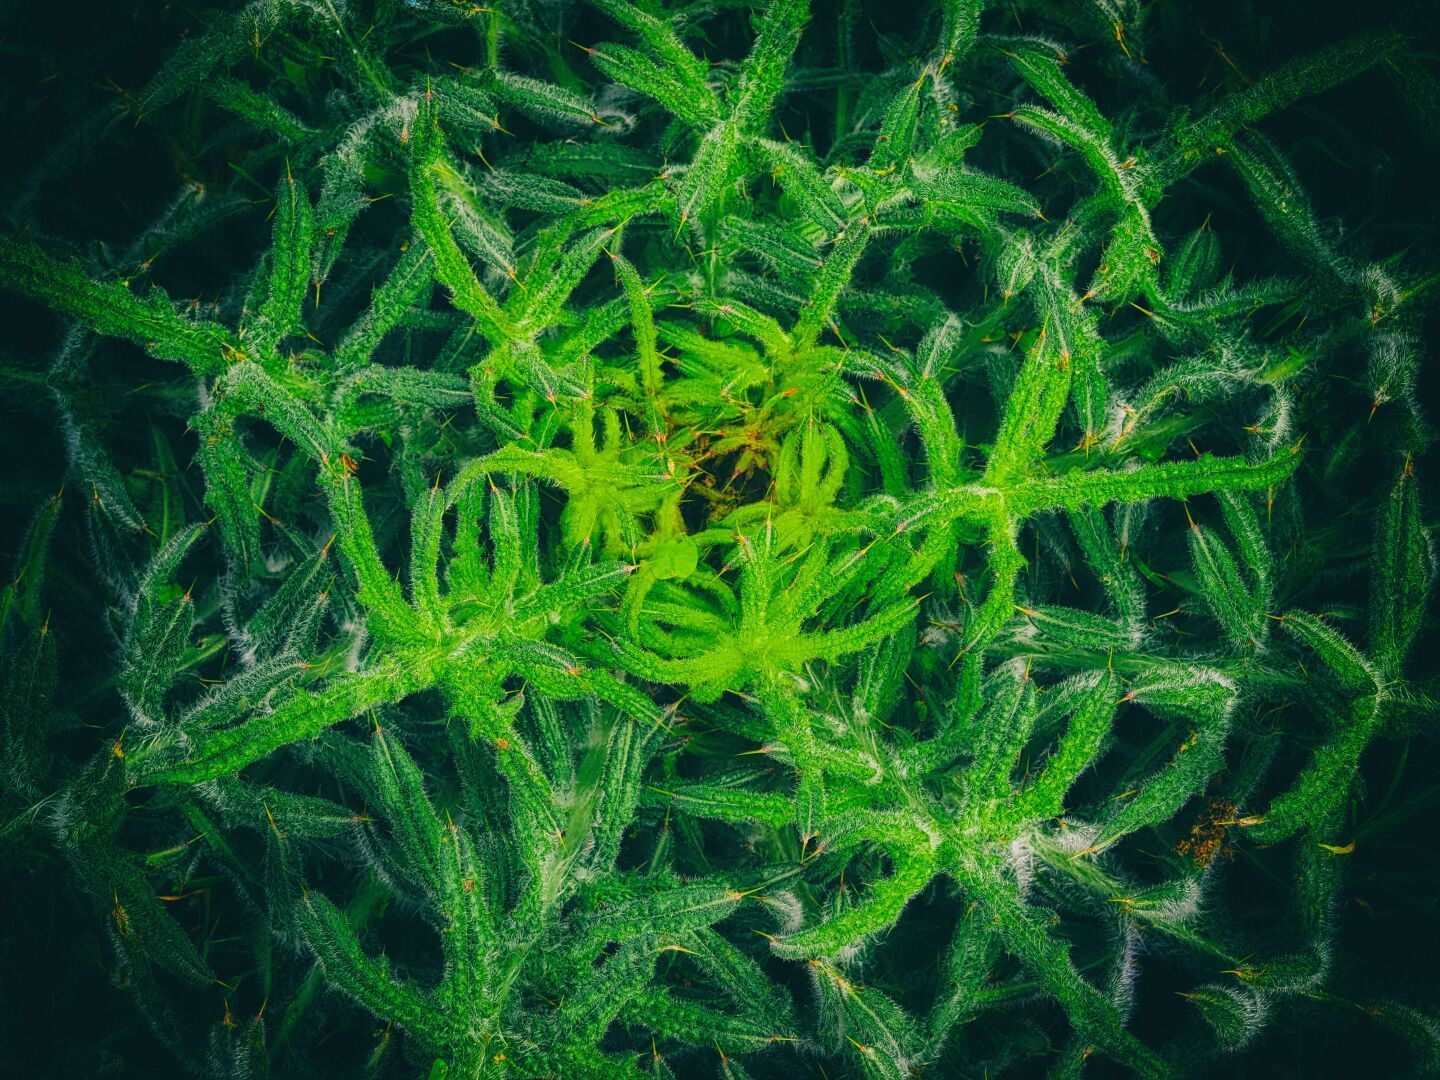 common thistle (still growing)

#nature #naturebeauty #green #therearenoweeds #omsystem #45mm #photography